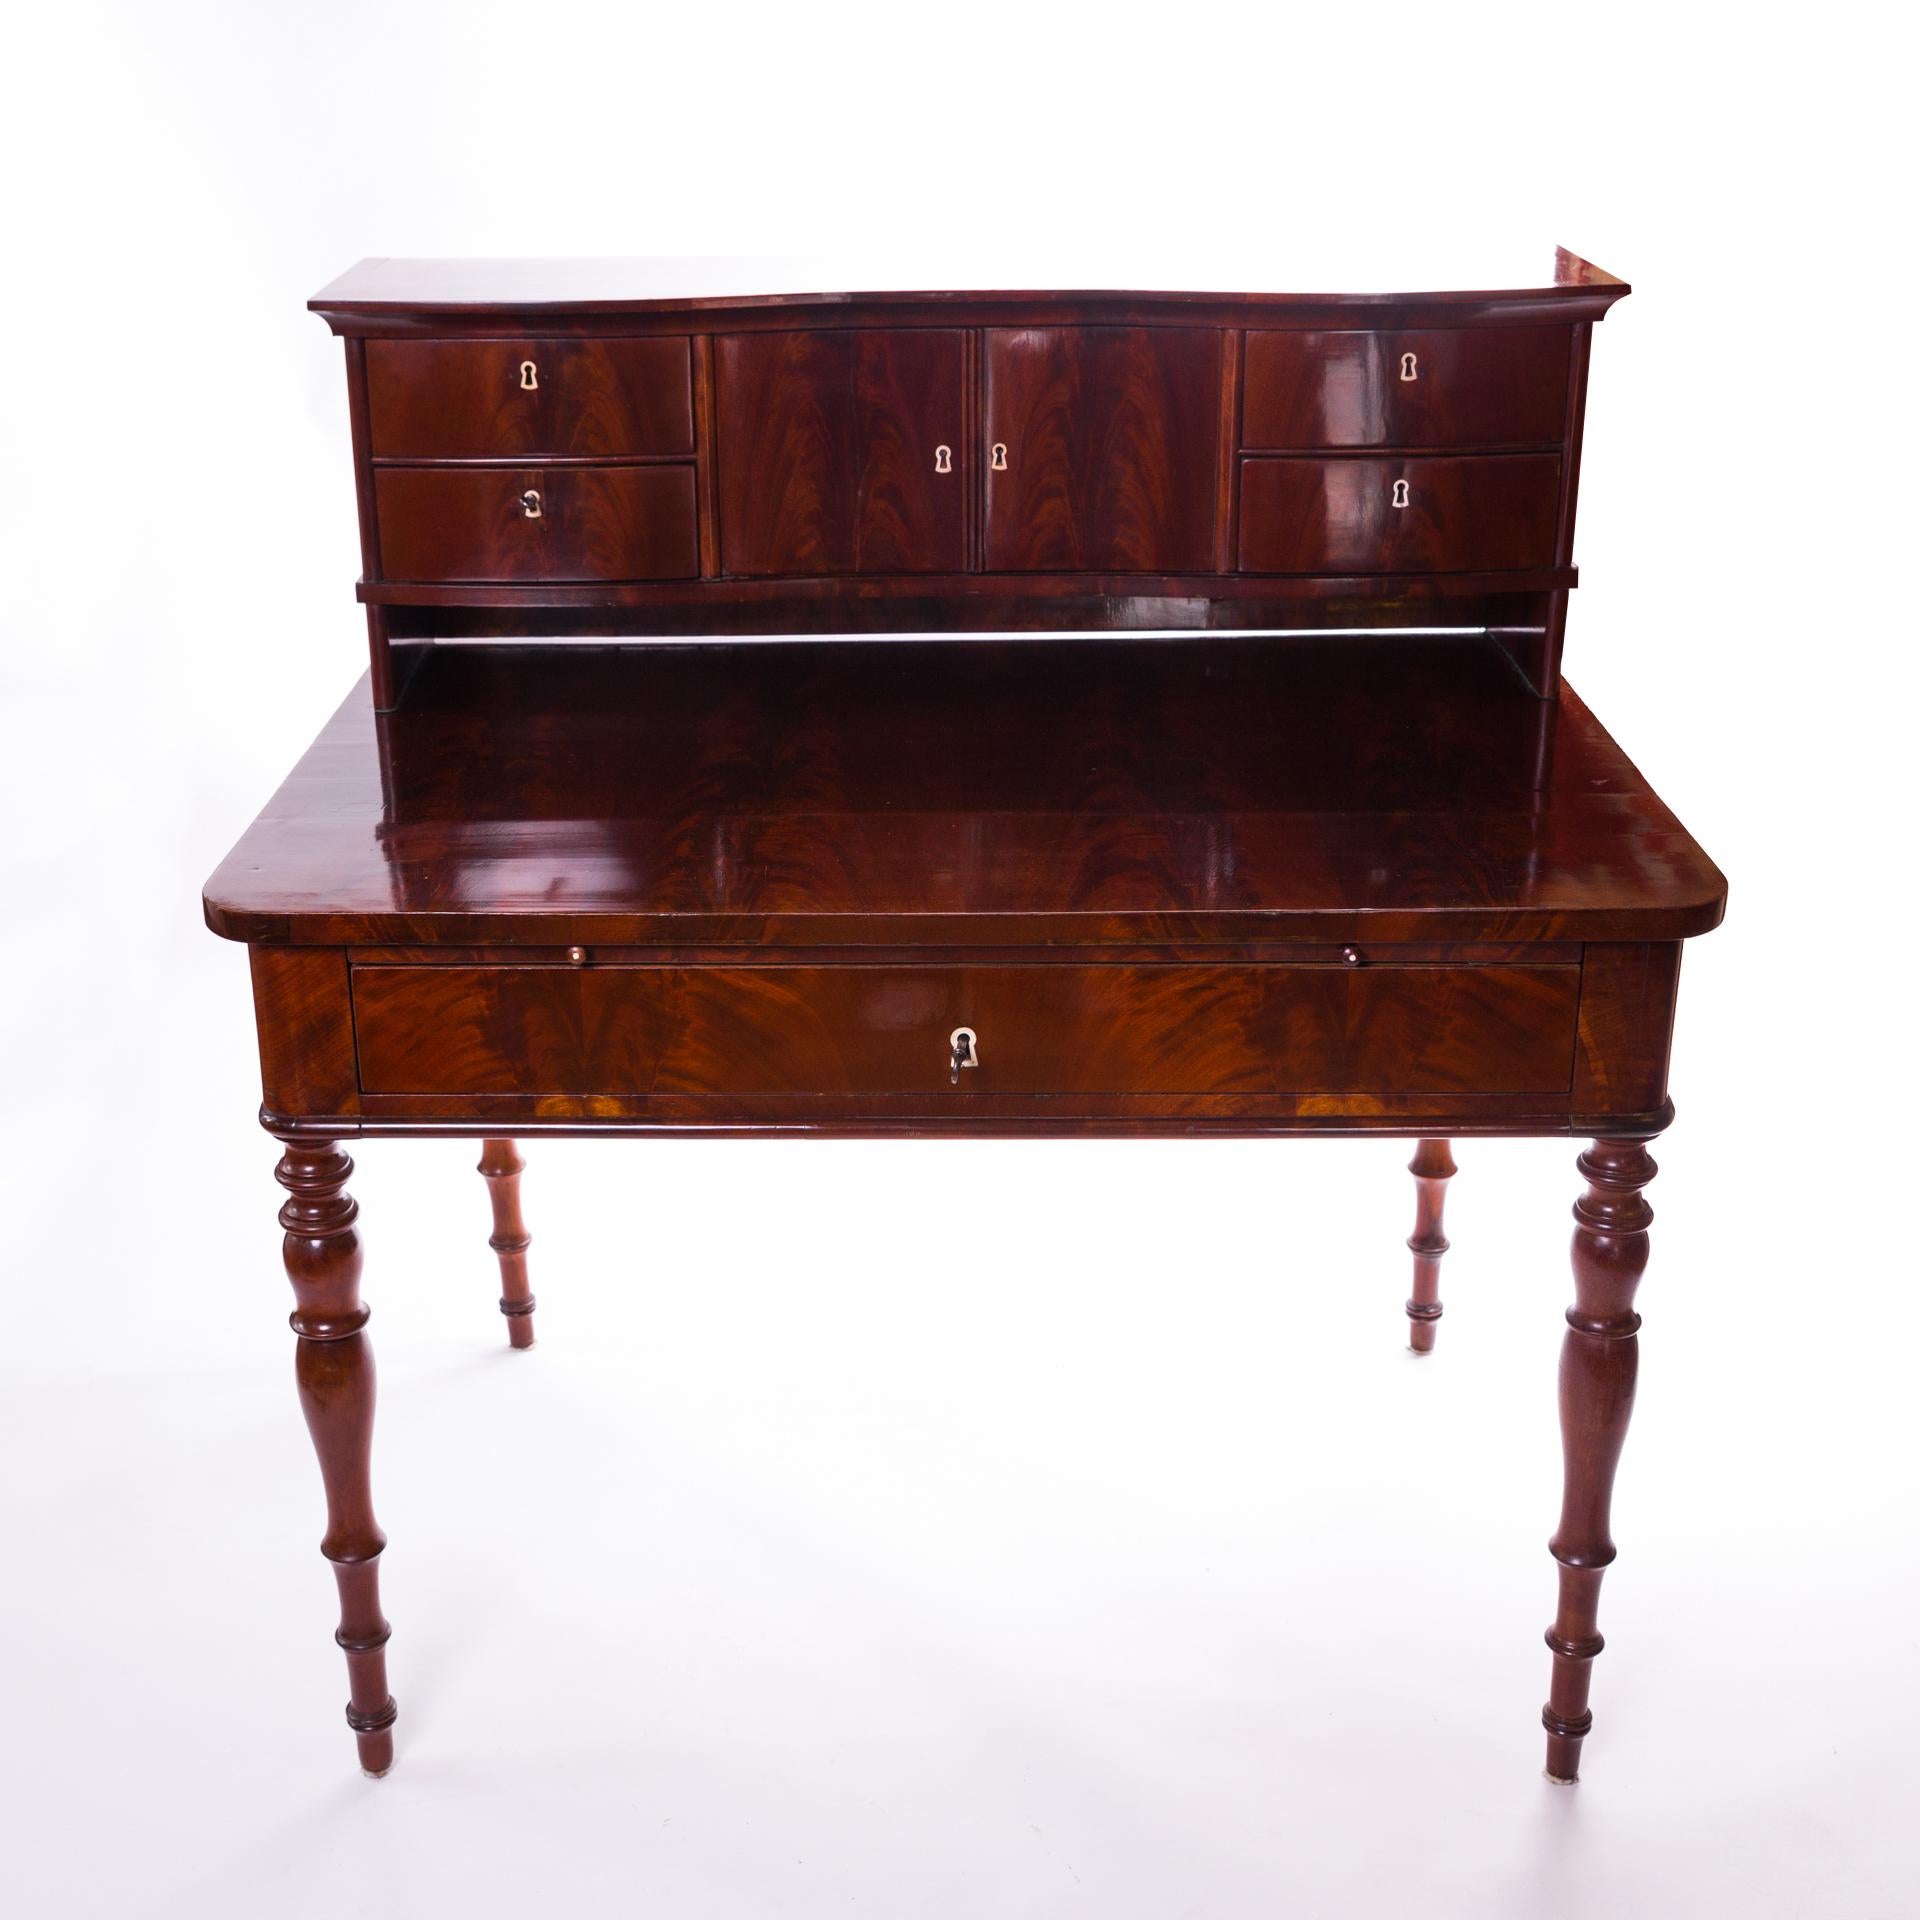 Polish secretary made of pyramid mahogany, polished. Made circa 1840 in the Biedermeier style. Beautiful proportions, expensive veneer, moderate ornamentation. Native bourgeois origin.

The main decoration of the desk is a long, central drawer